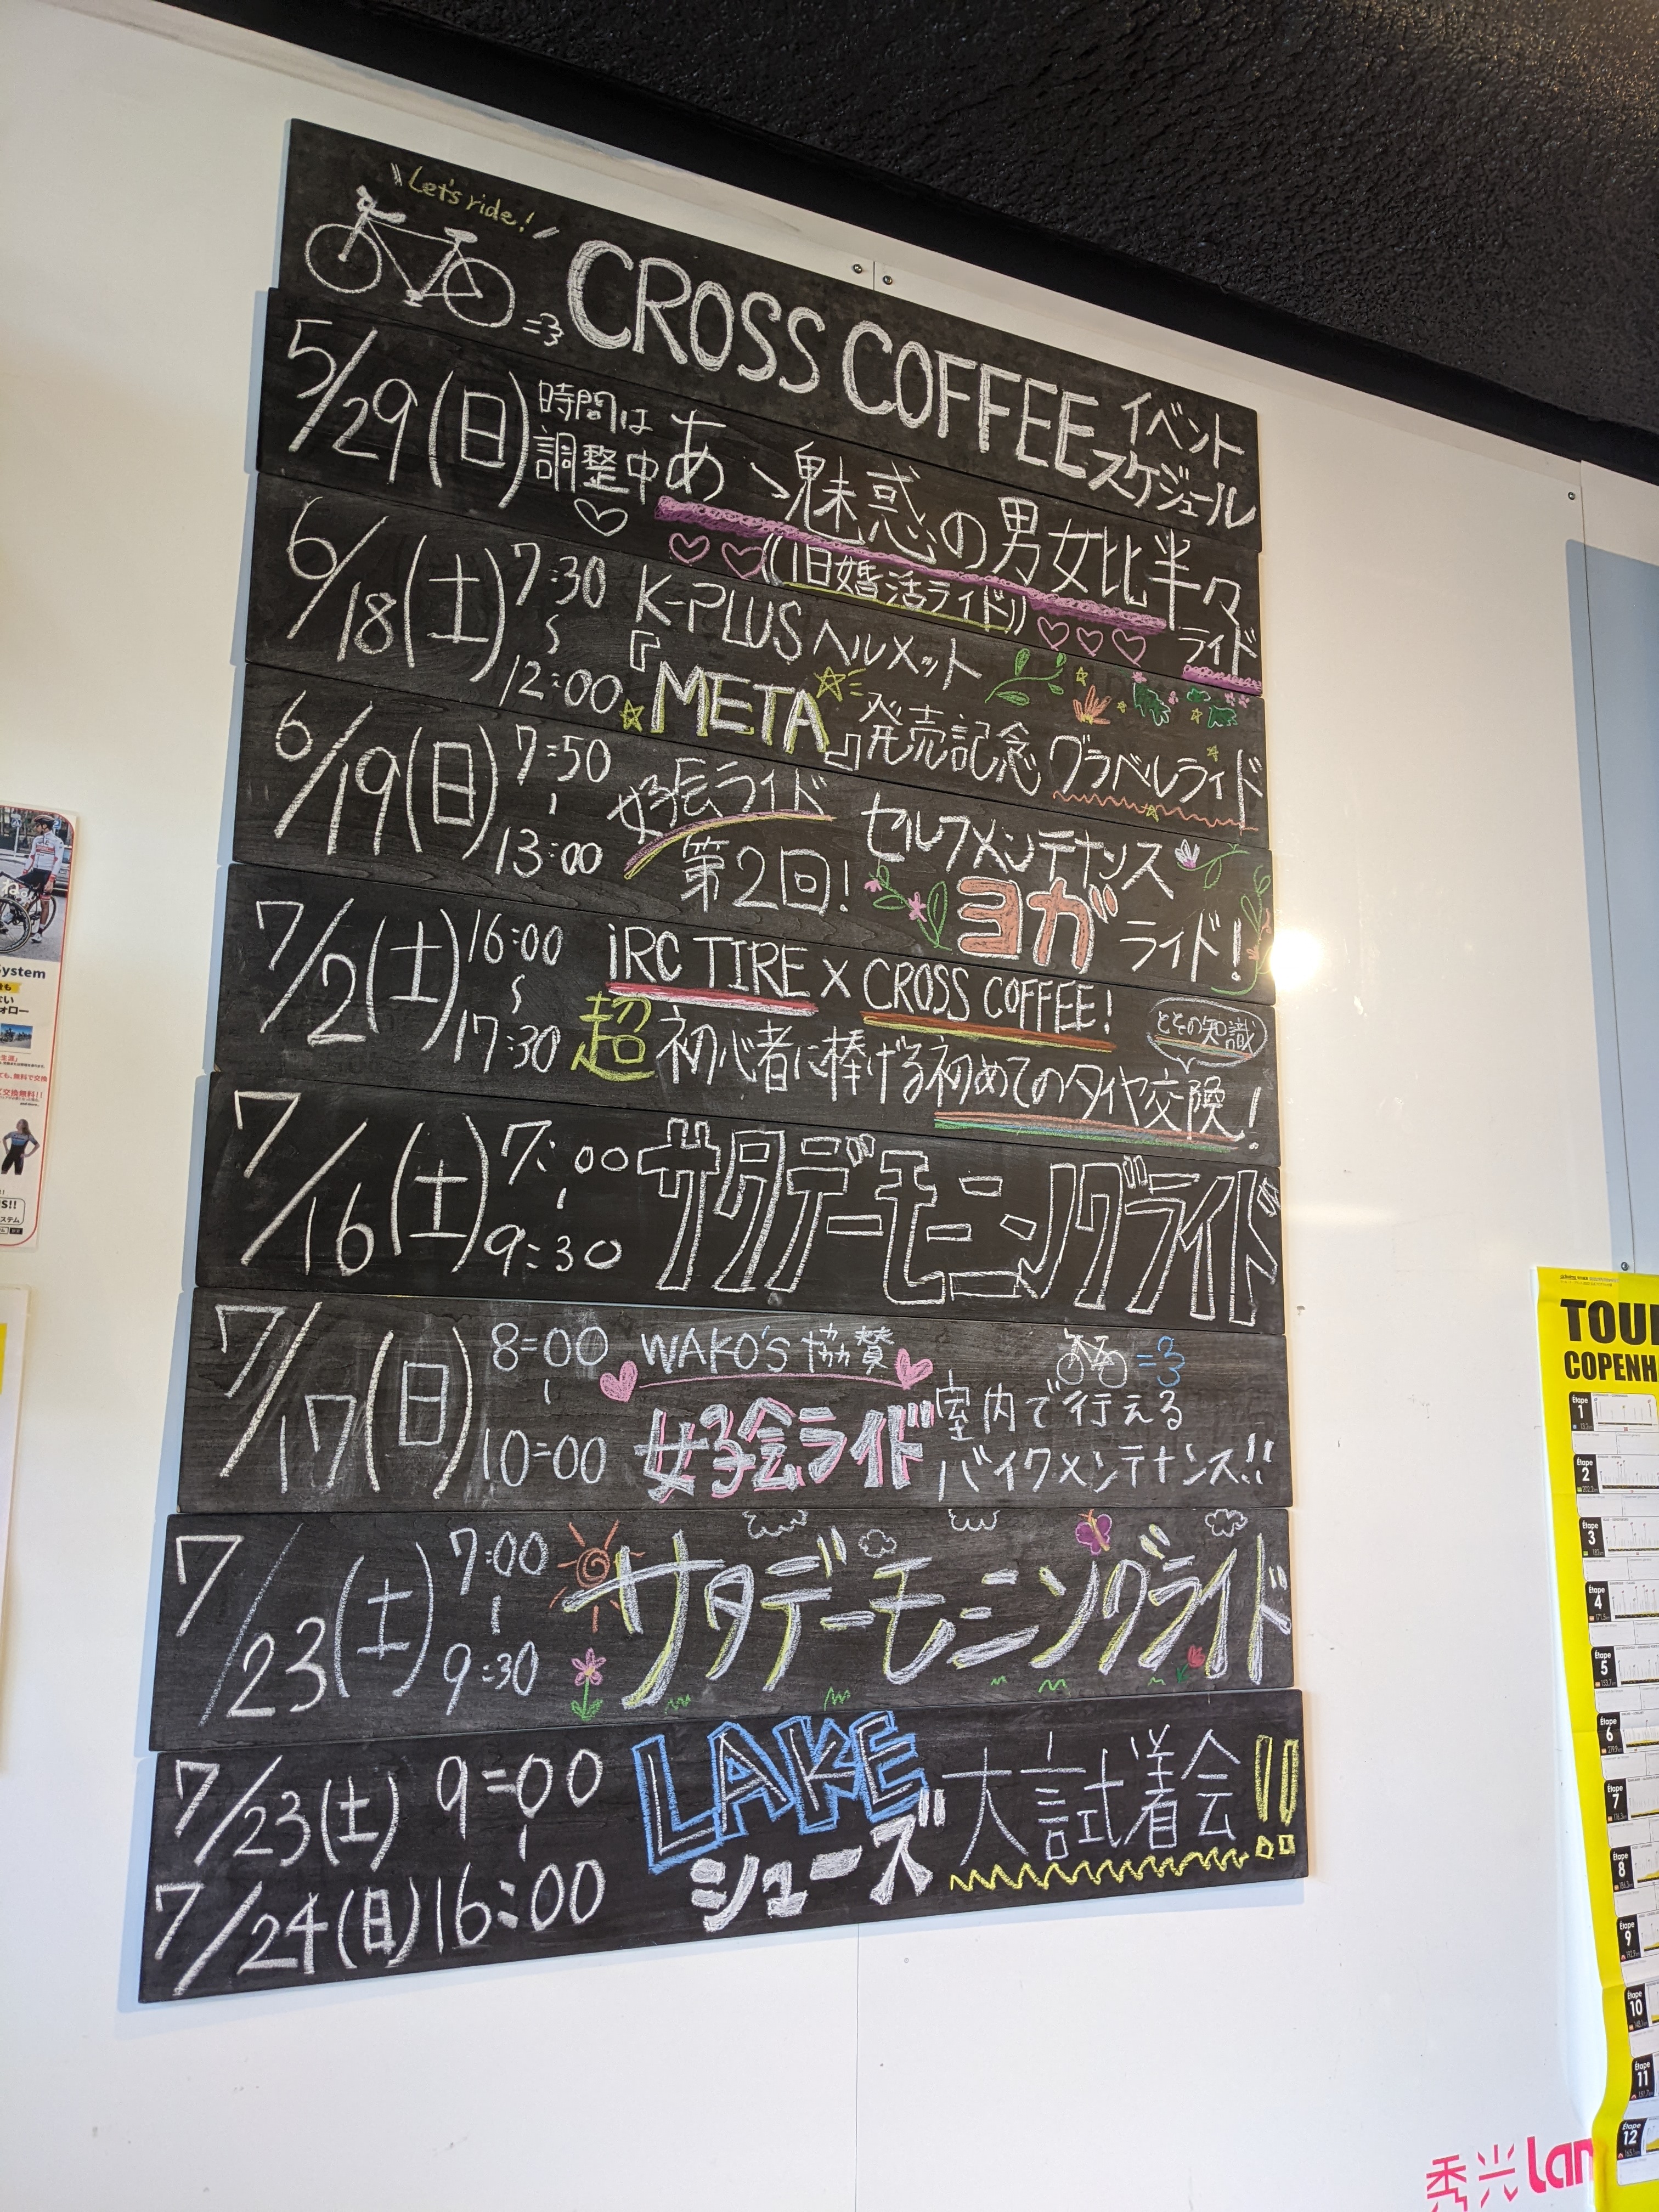 CROSS COFFEE　-chocolate & sandwiches- event-schedule